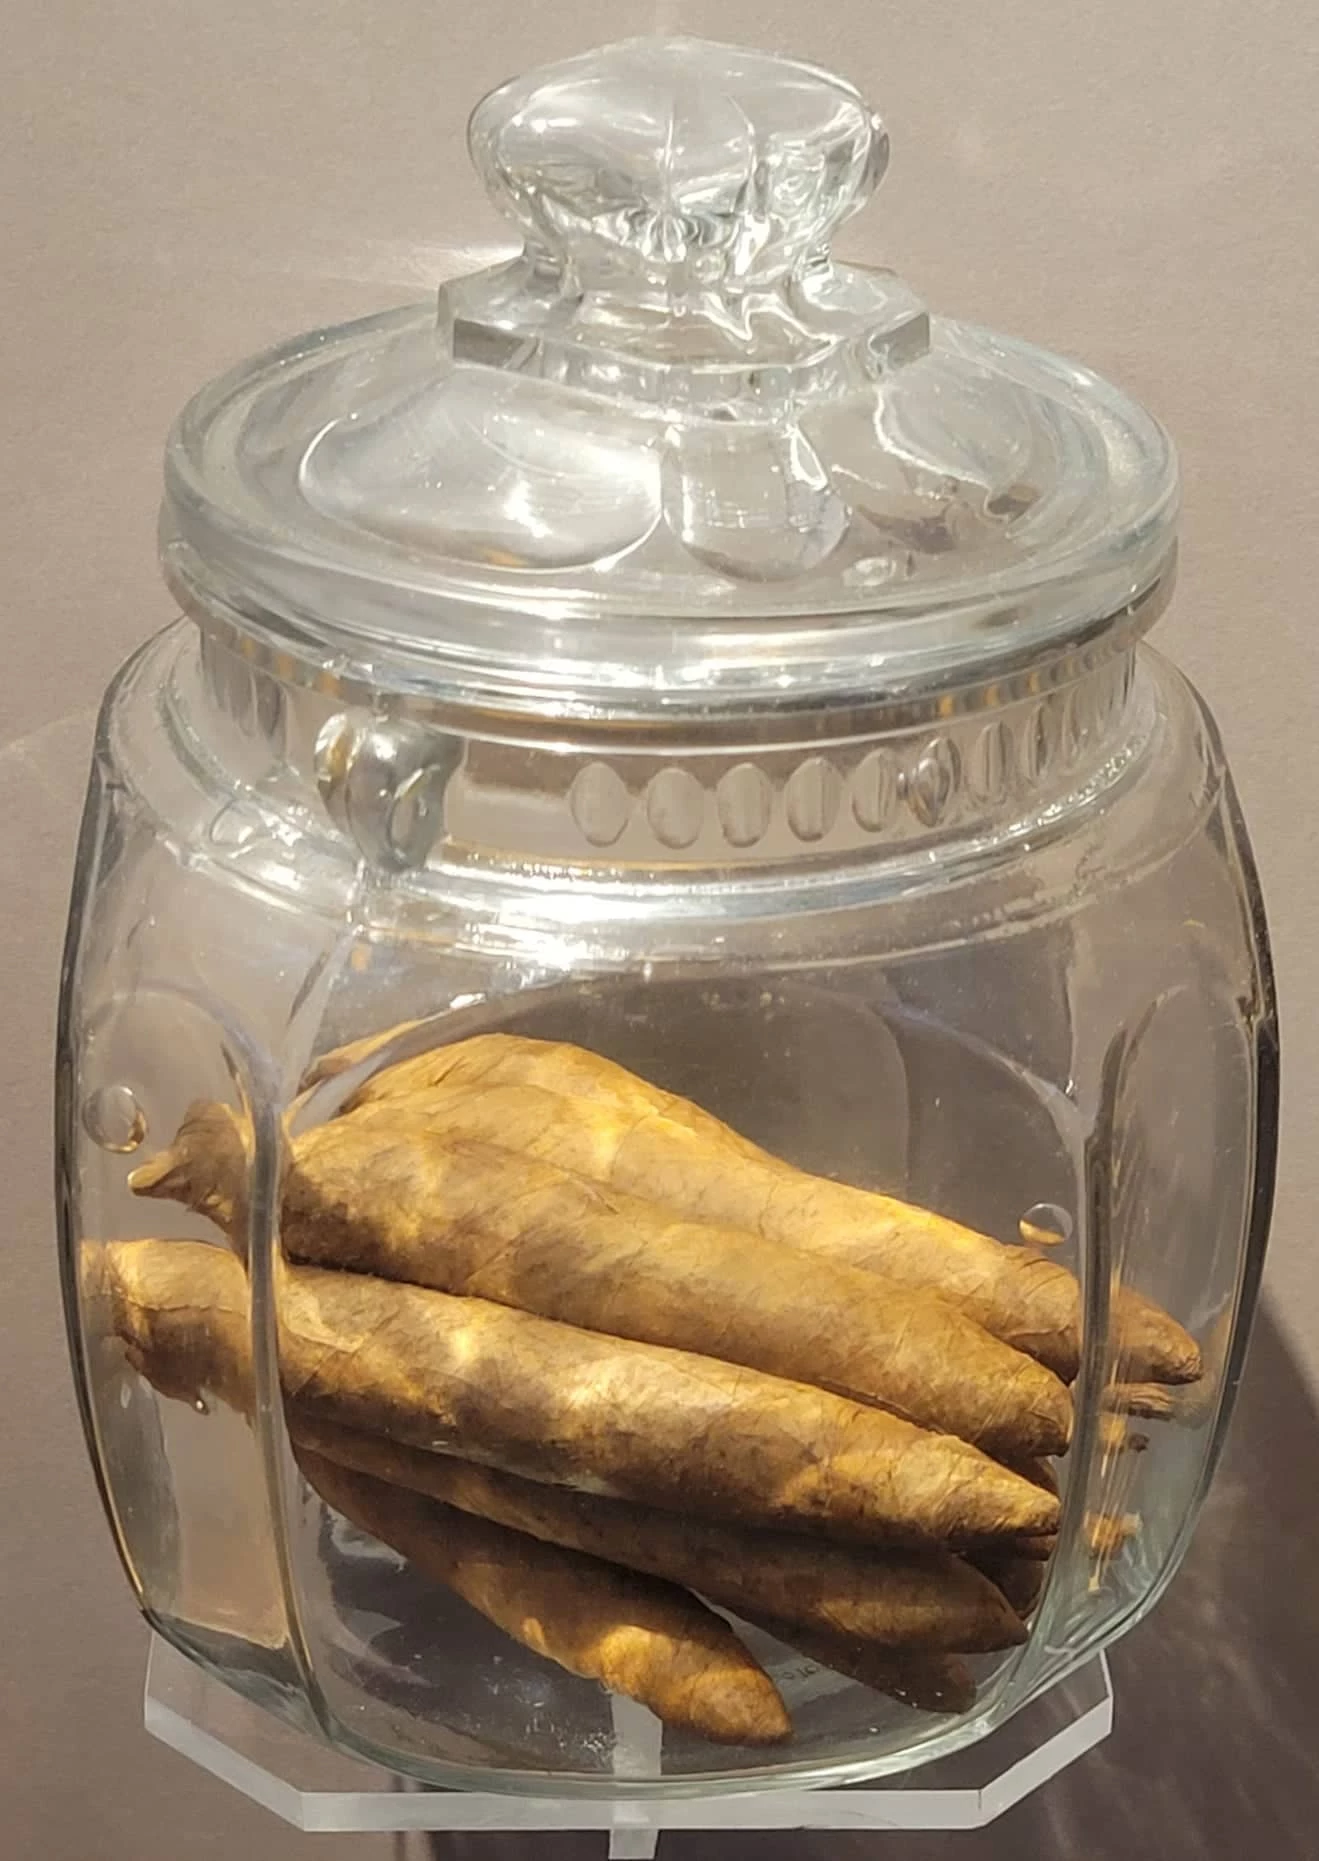 Clear glass jar with lid containing eight plump, hand-rolled cigars. The cigars are medium-brown.